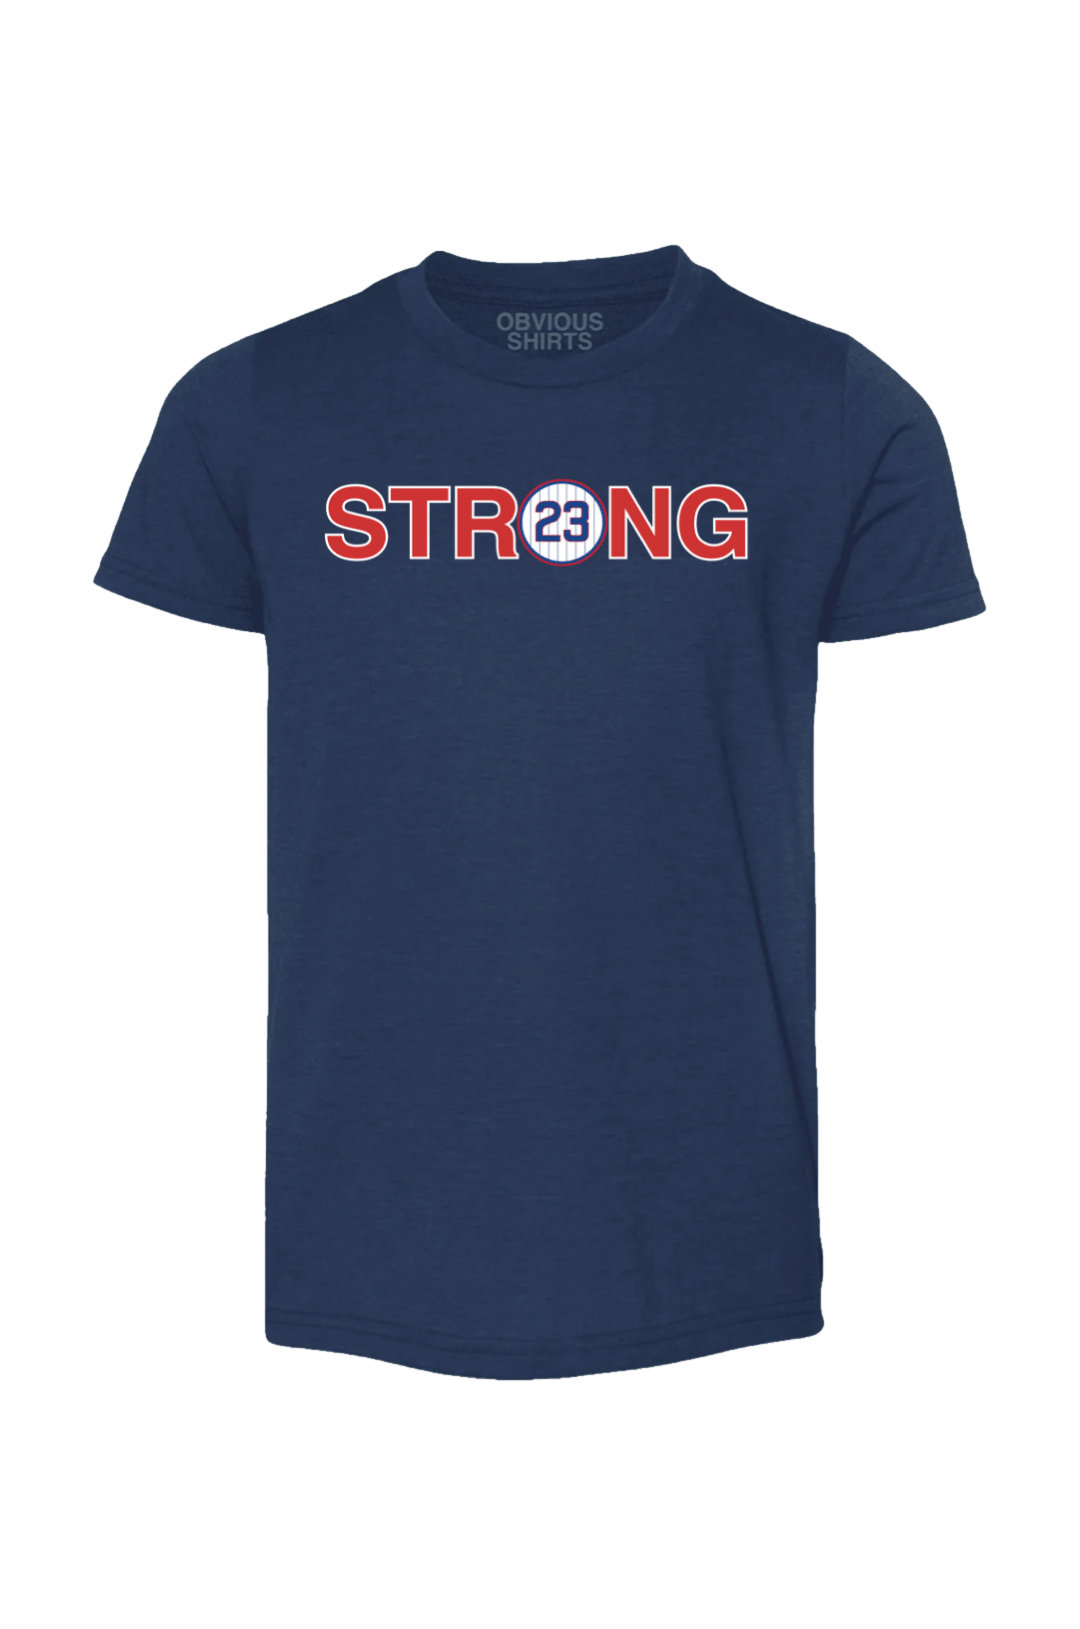 WE ARE ALL RYNO STRONG. (YOUTH NAVY) - OBVIOUS SHIRTS